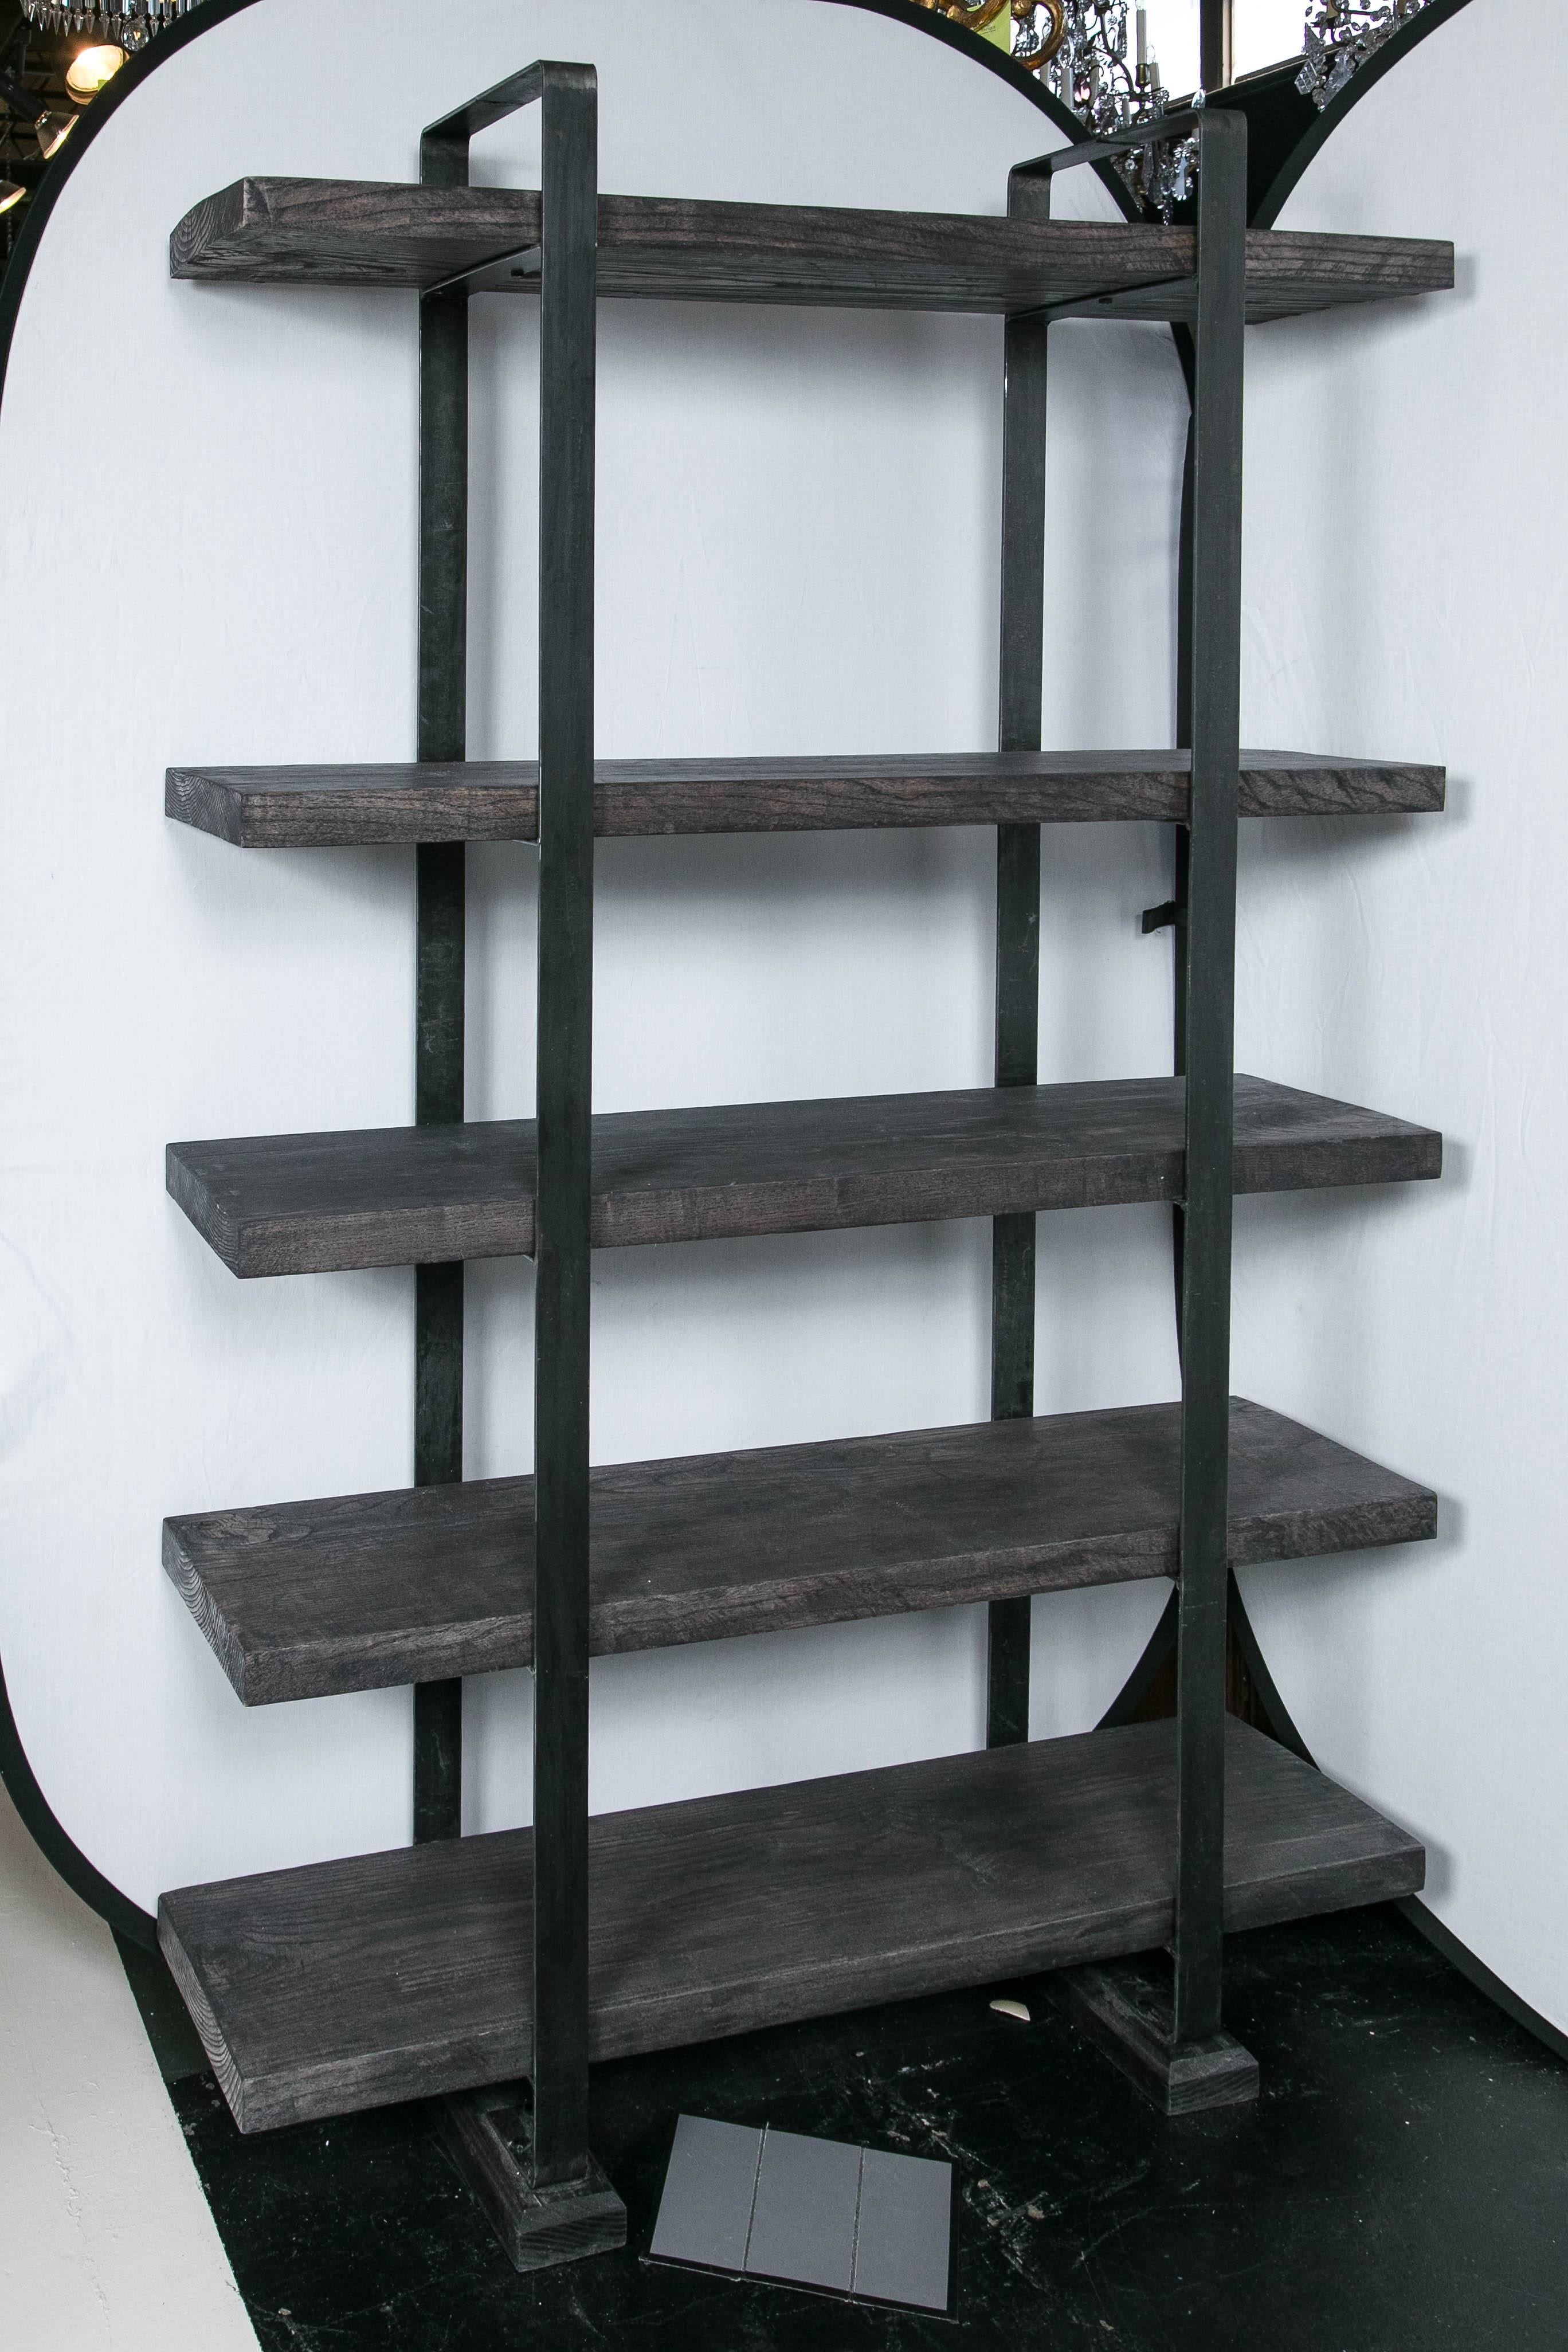 Five-tiered shelf made from thick ash planking and welded steel bands as supports. The shelves come from an antique saw mill, aged and stained. The two inch wide frame on each end is a welded 18 inch steel bent to form an arch over the top.